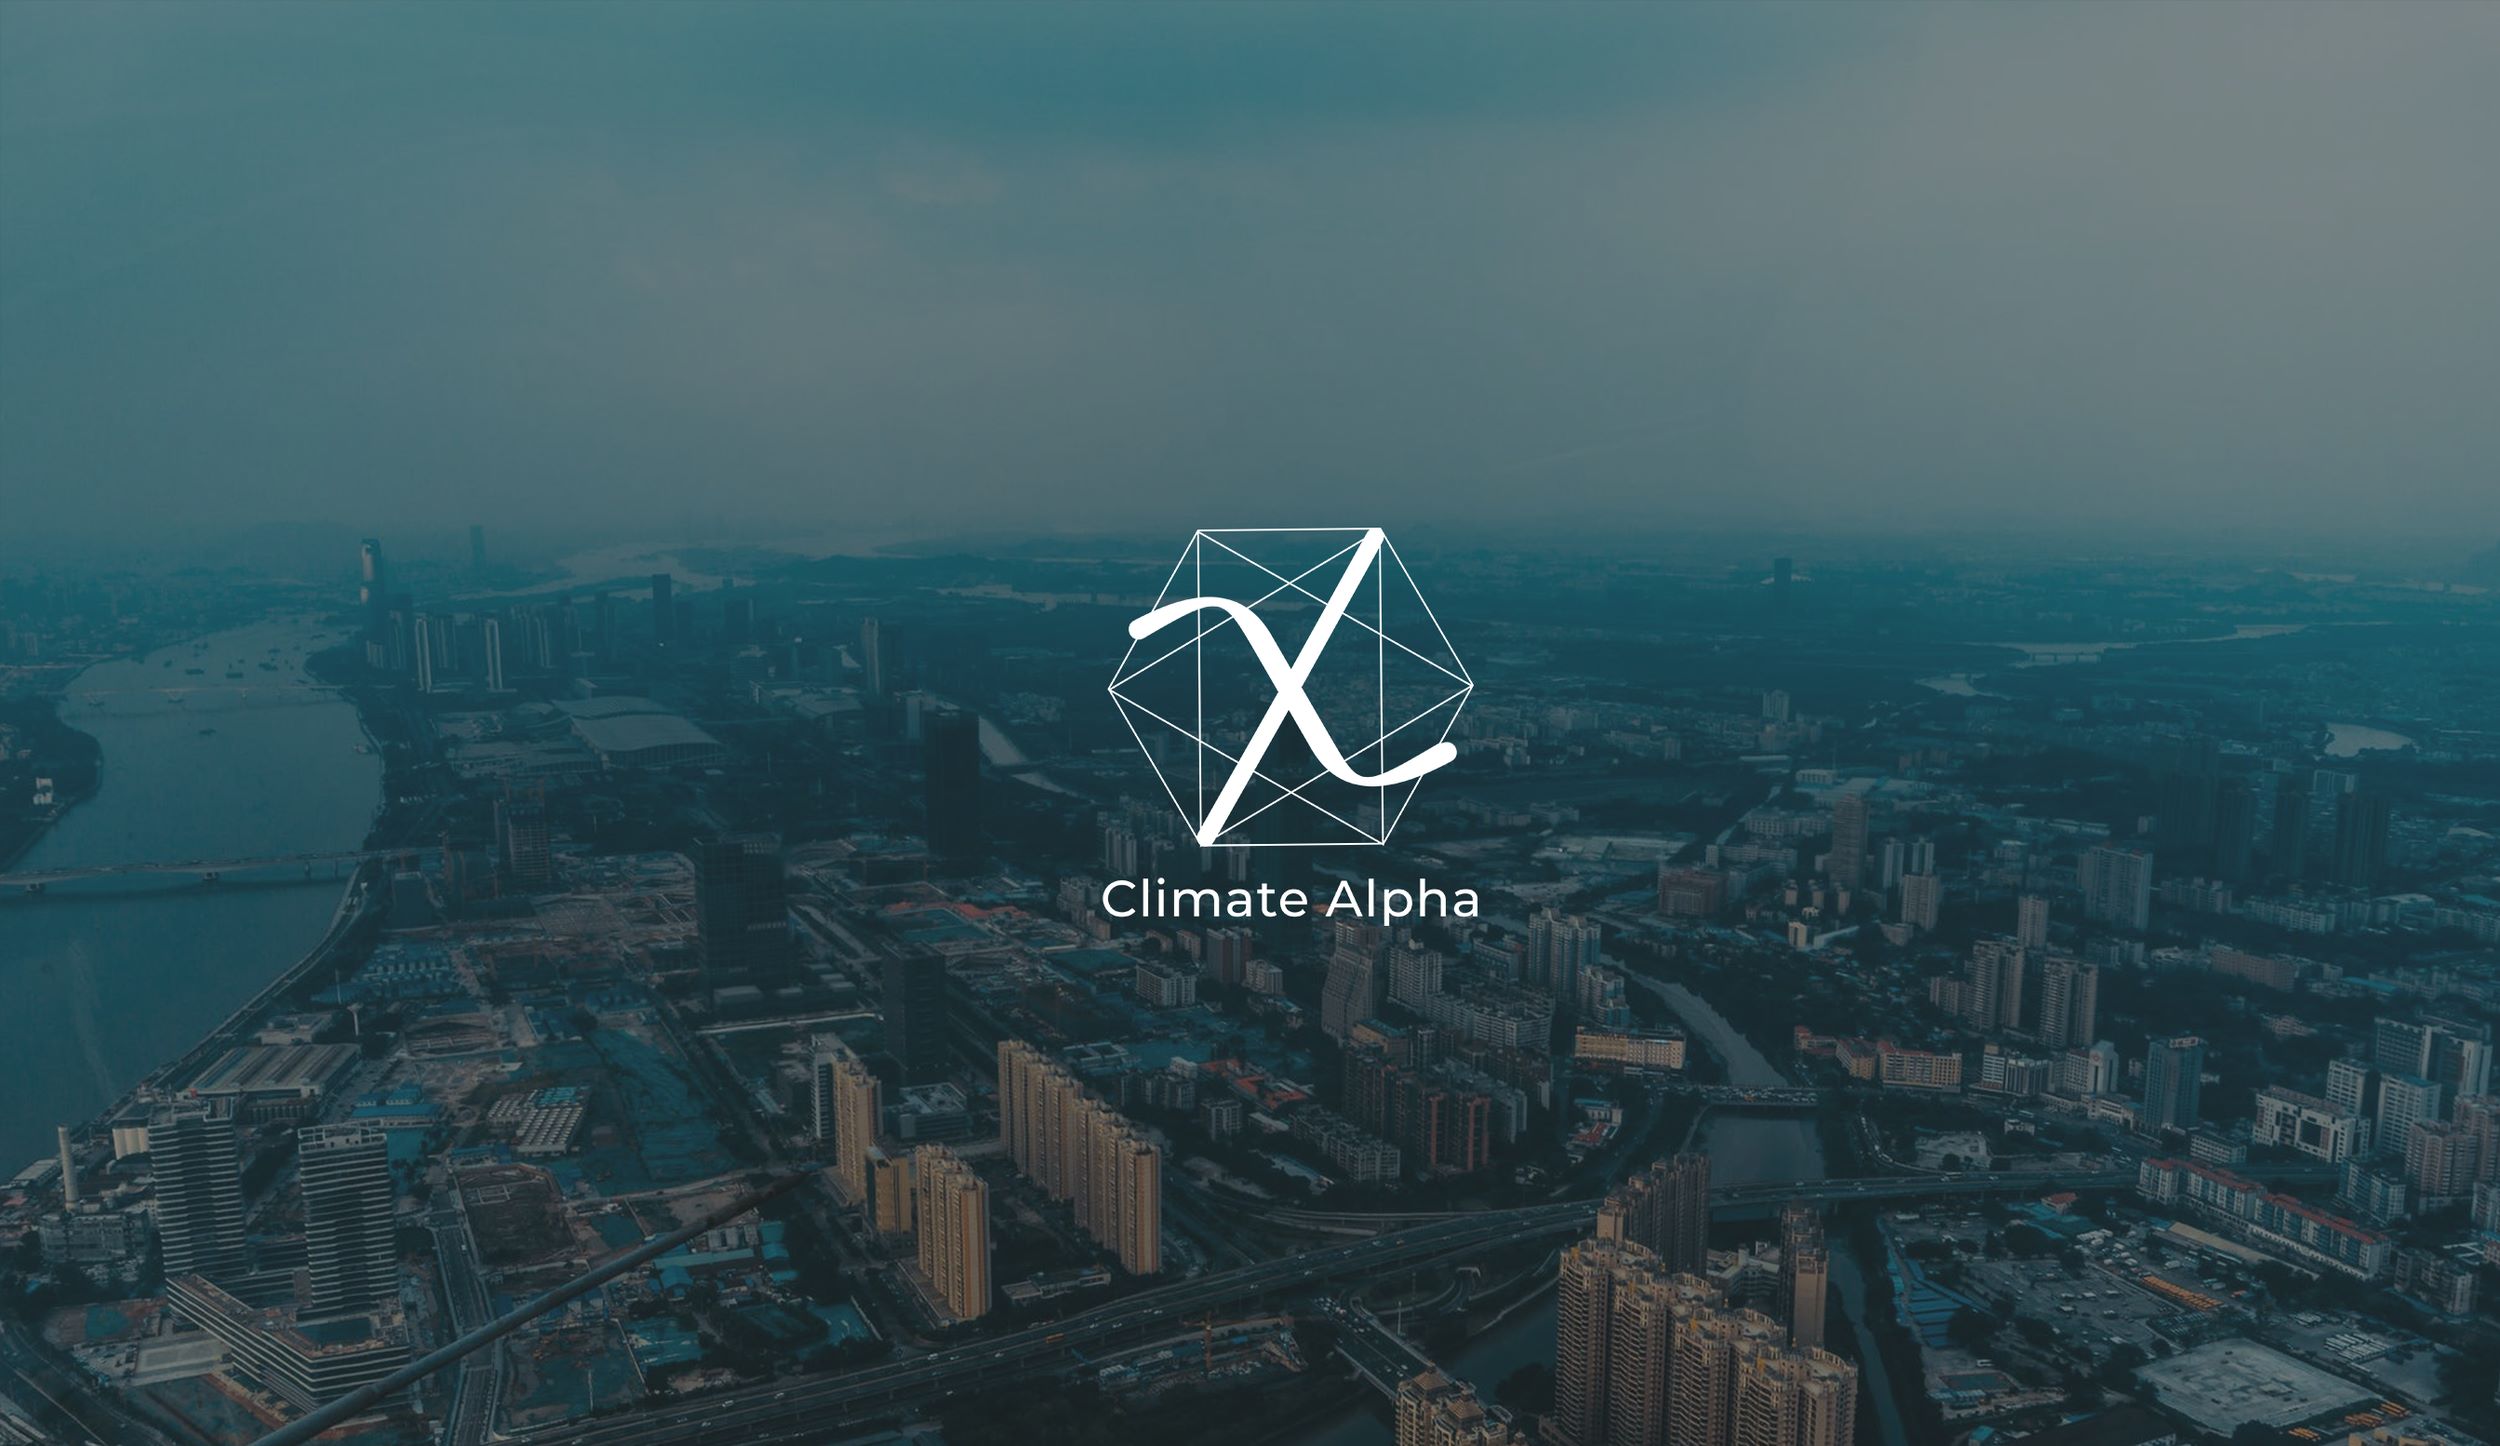 singapore-based-climate-alpha-raises-5-million-in-seed-funding-to-analyze-climate-change-impact-on-real-estate